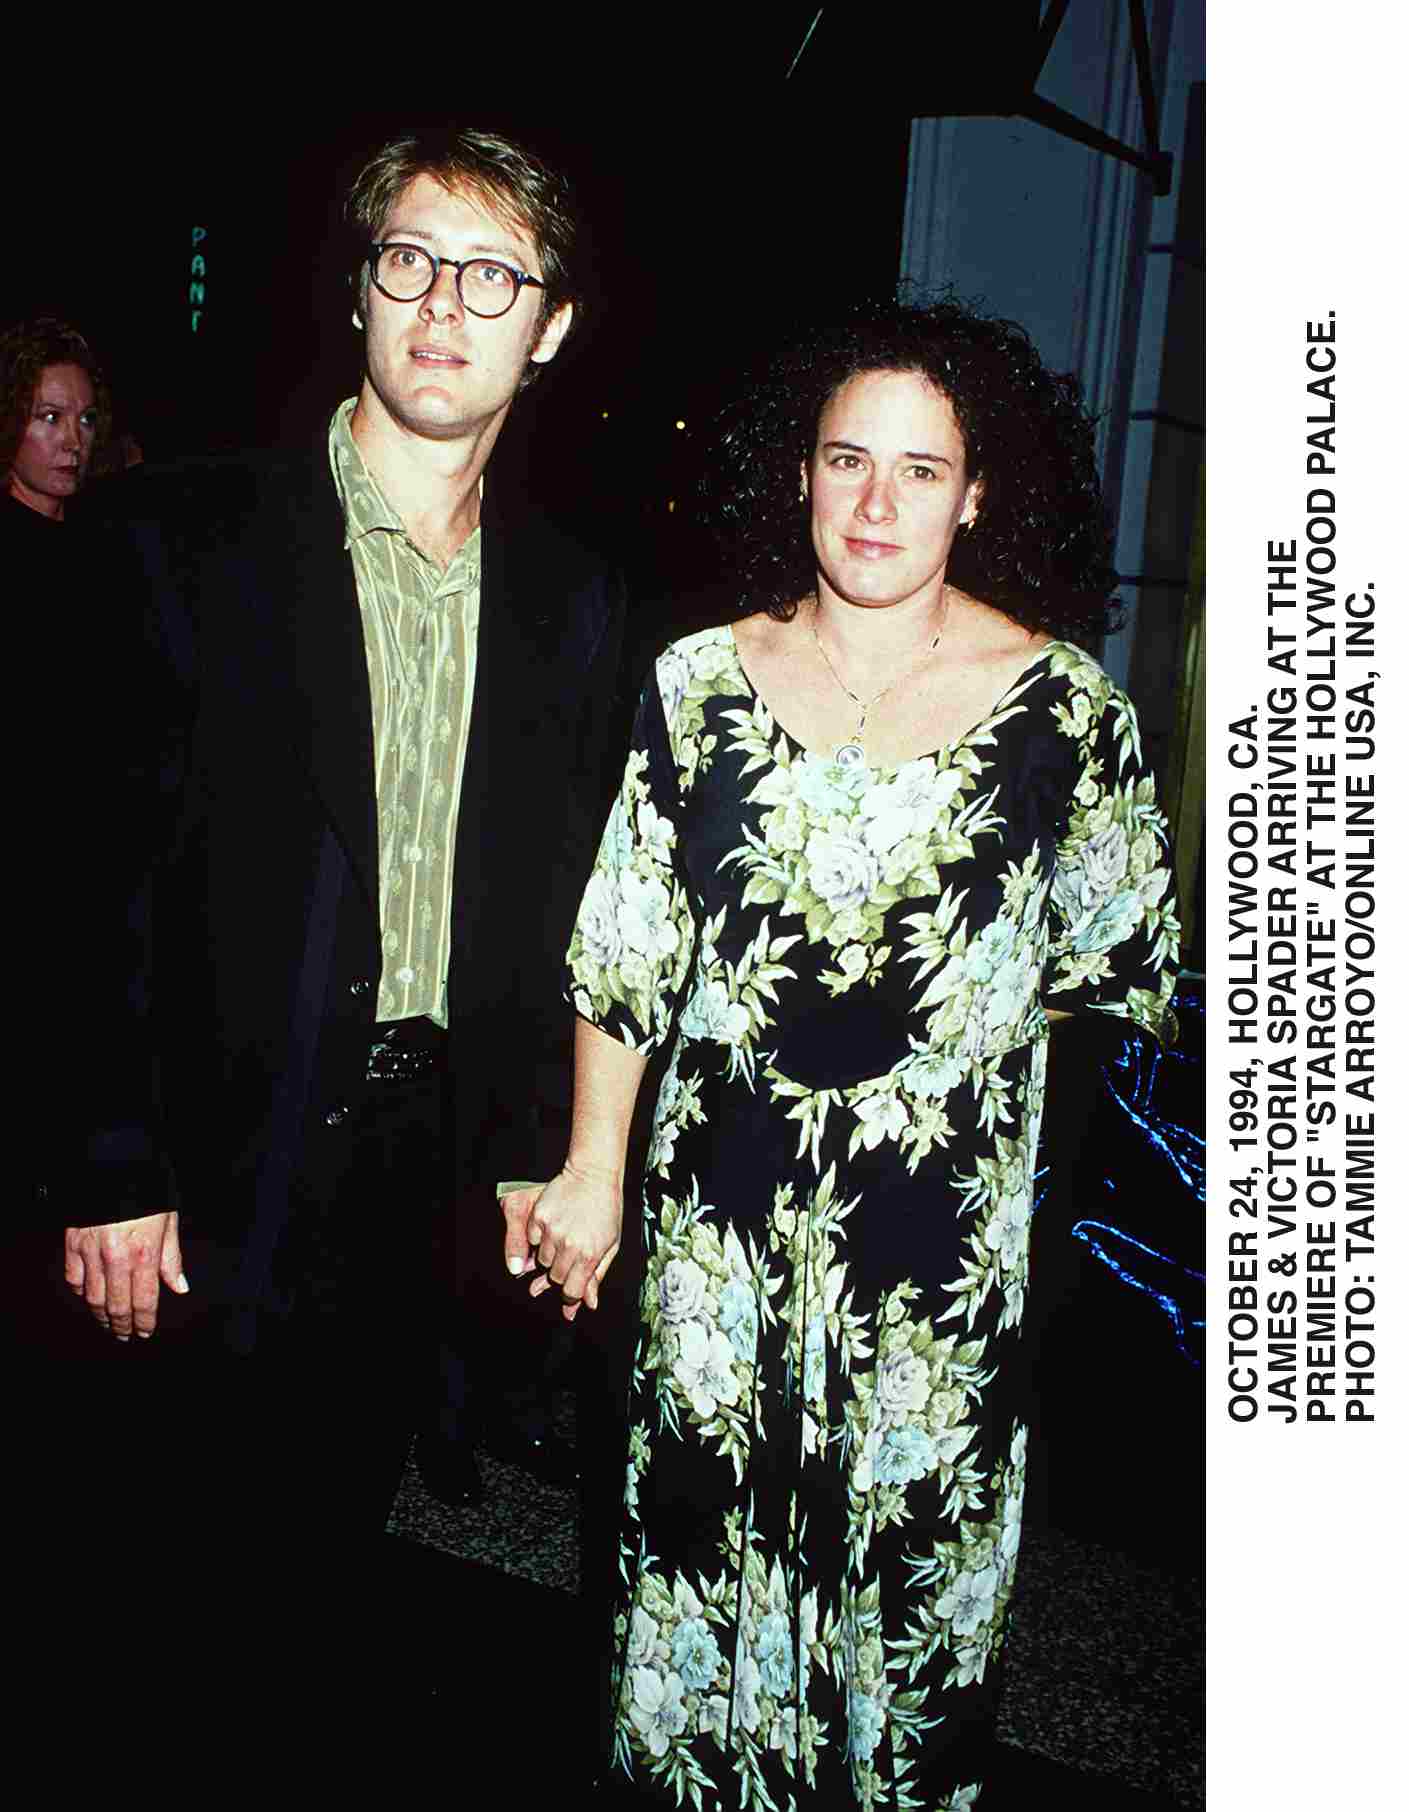 James Spader and Victoria Kheel at the premiere of "Stargate" on October 24, 1994 | Source: Getty Images